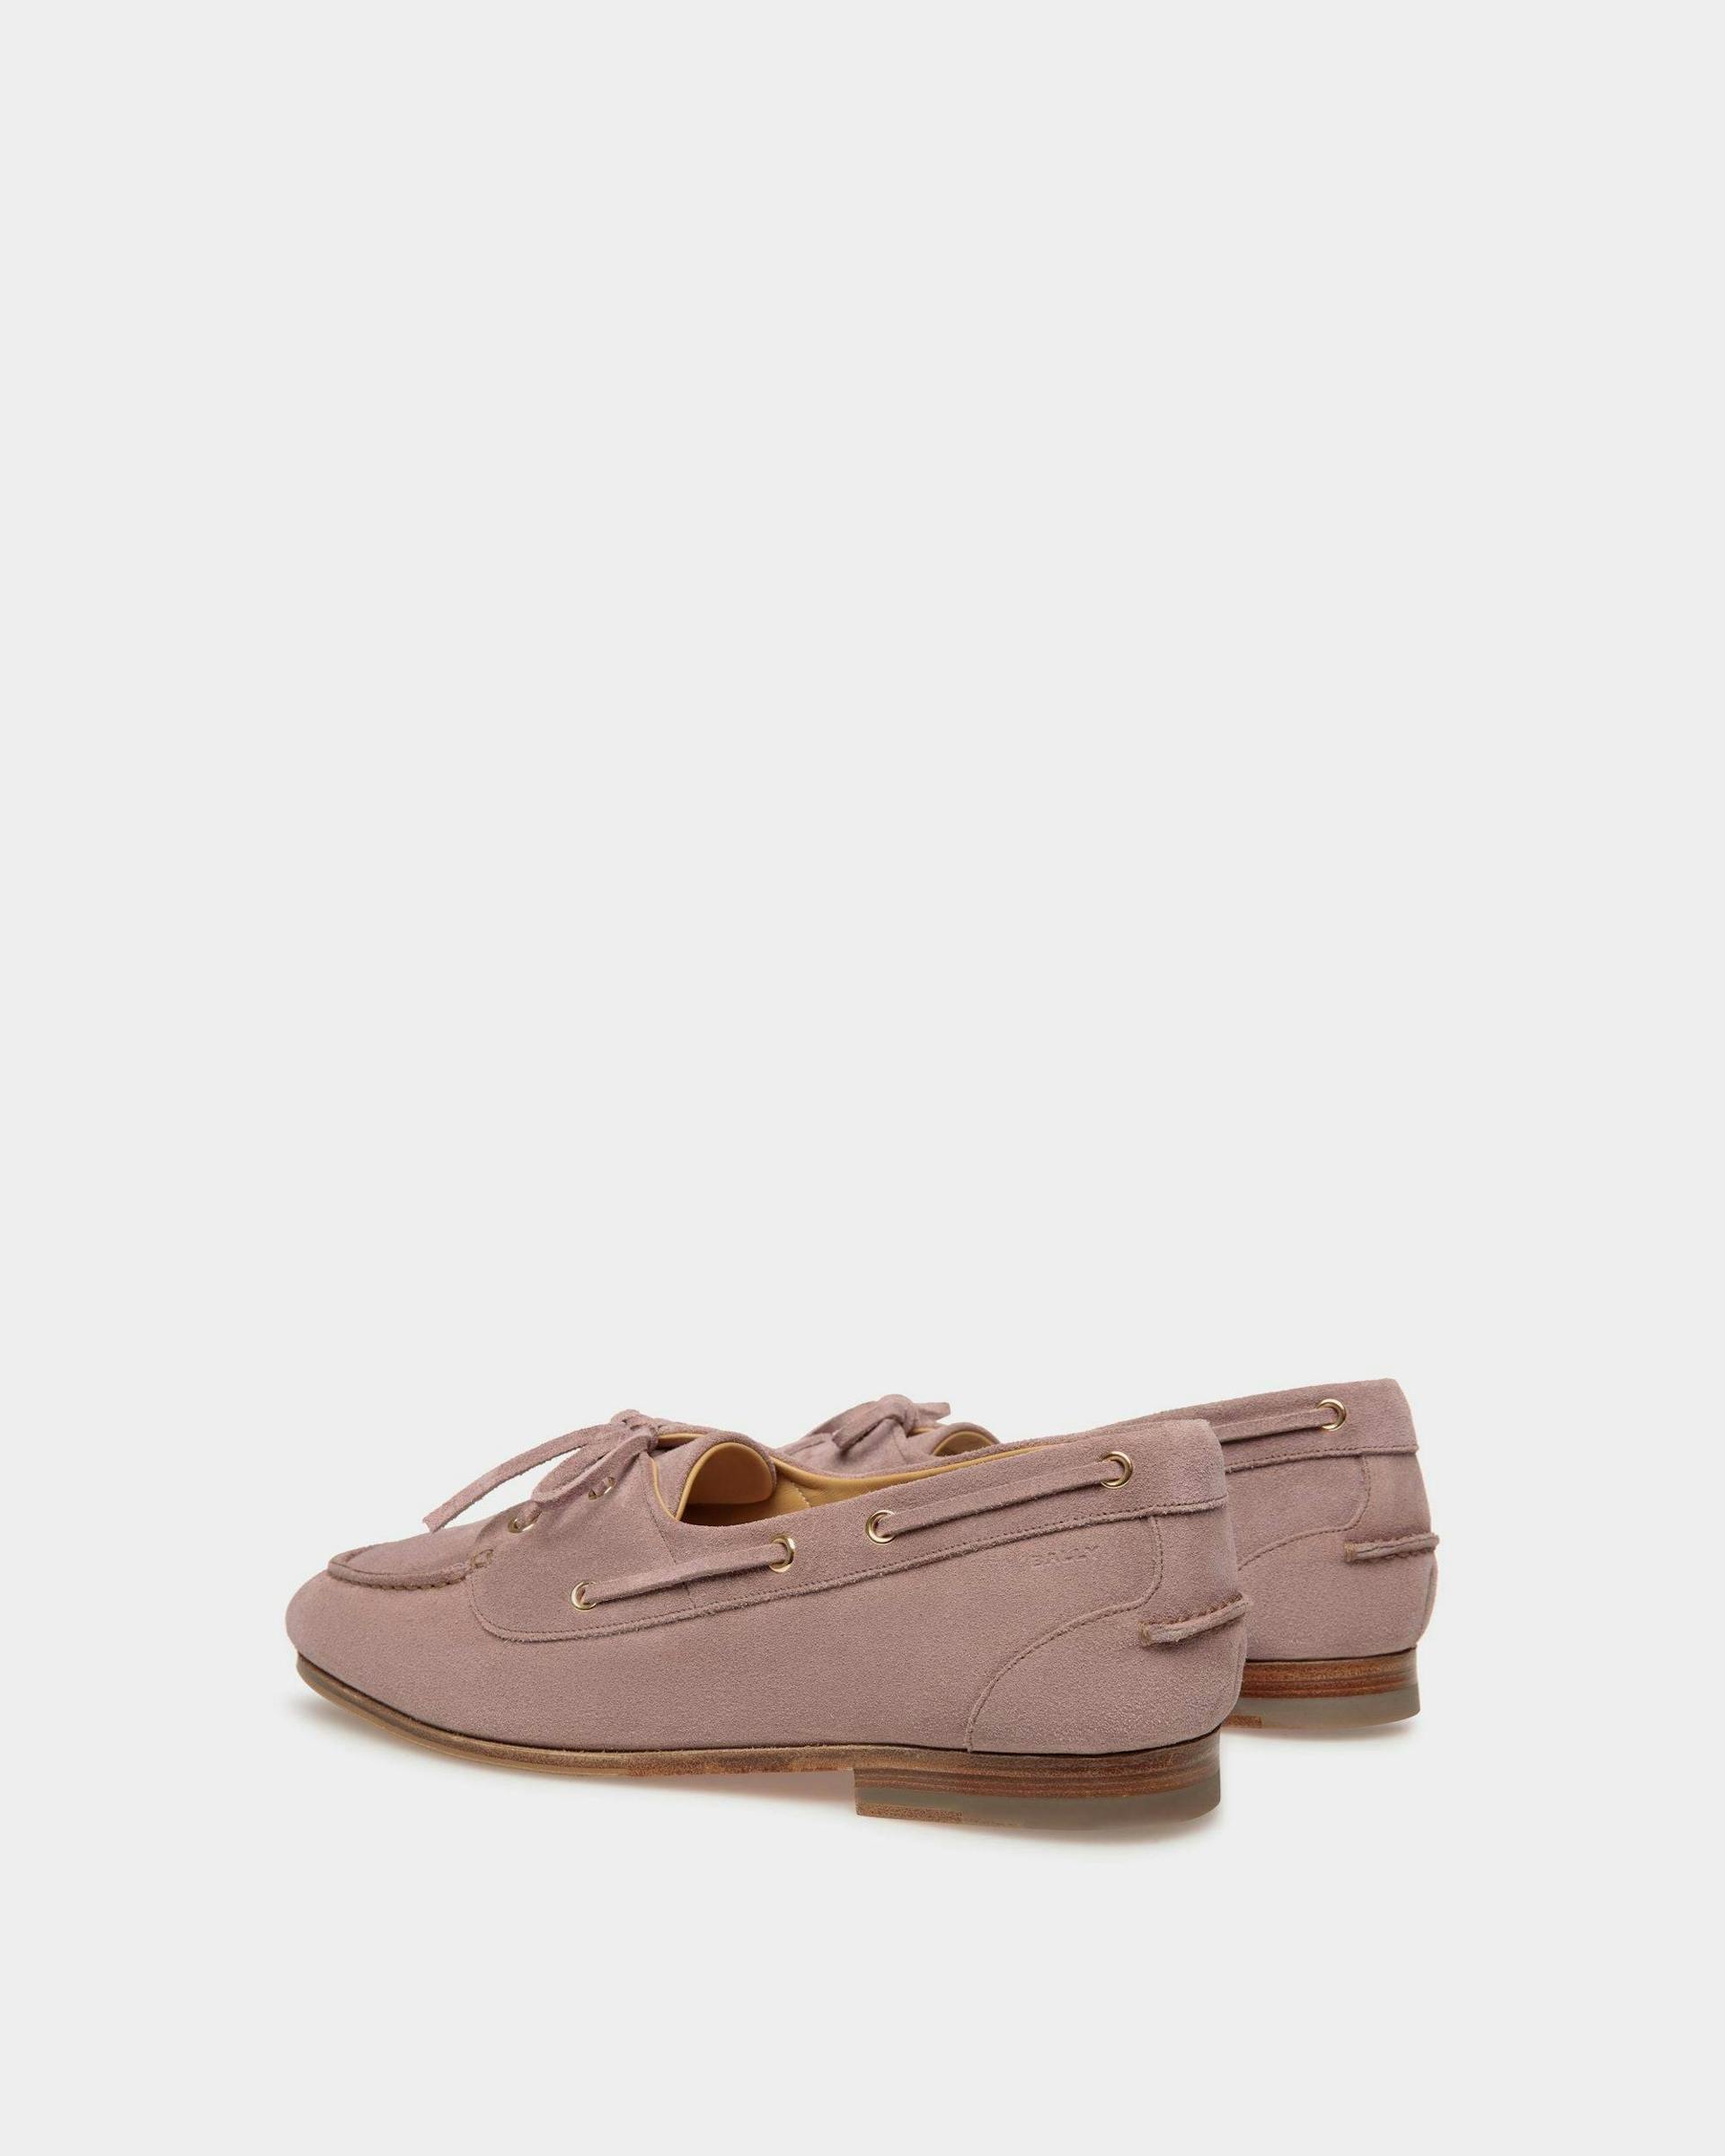 Men's Plume Moccasin in Light Mauve Suede | Bally | Still Life 3/4 Back